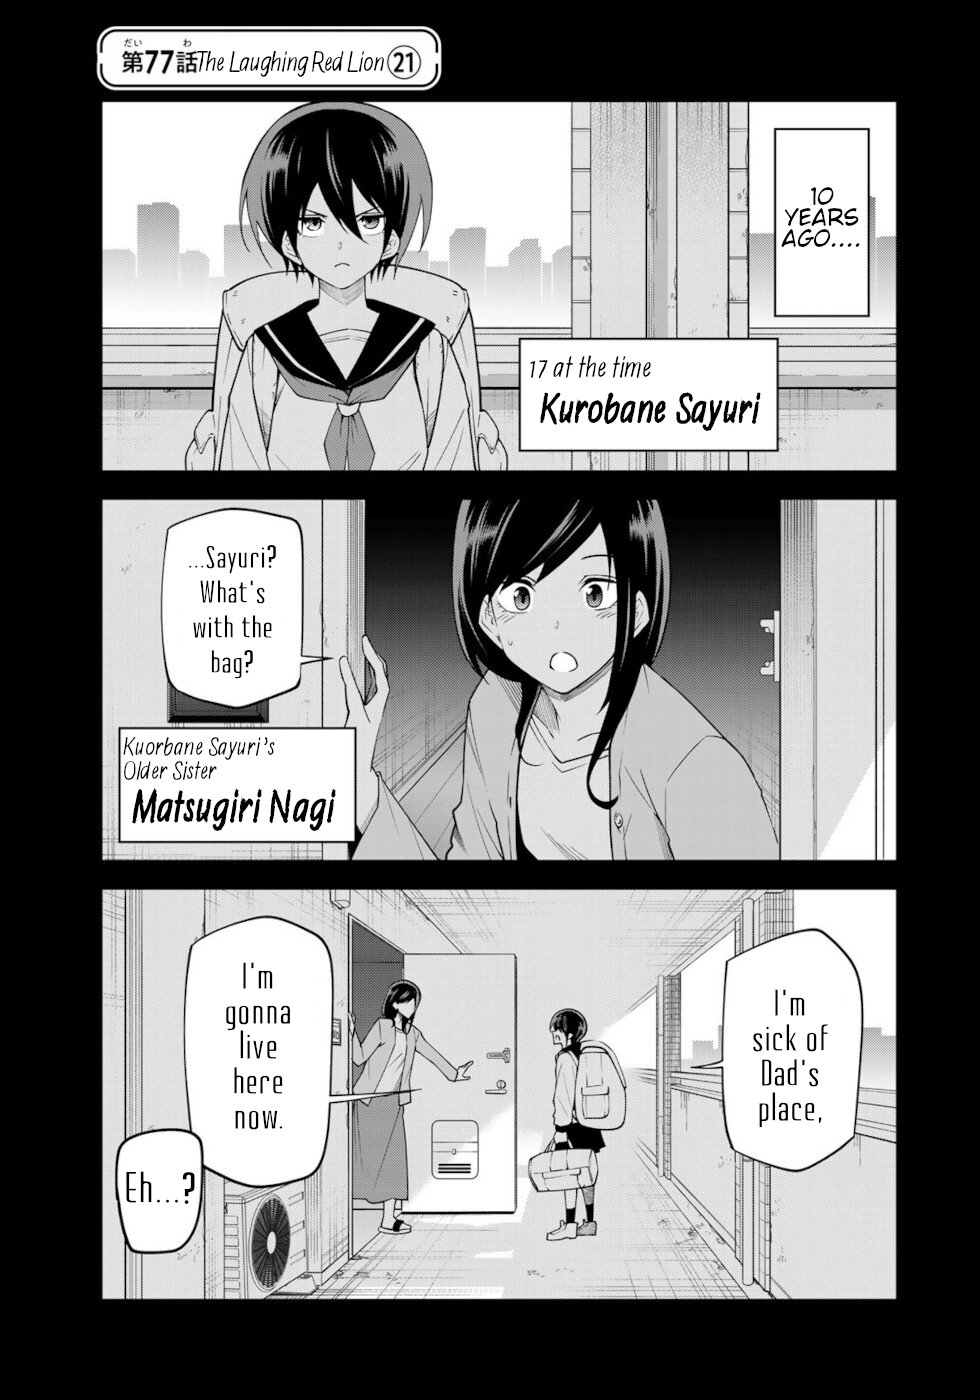 Tokyo Neon Scandal Vol.8 Chapter 77: The Laughing Red Lion 21 - Picture 1